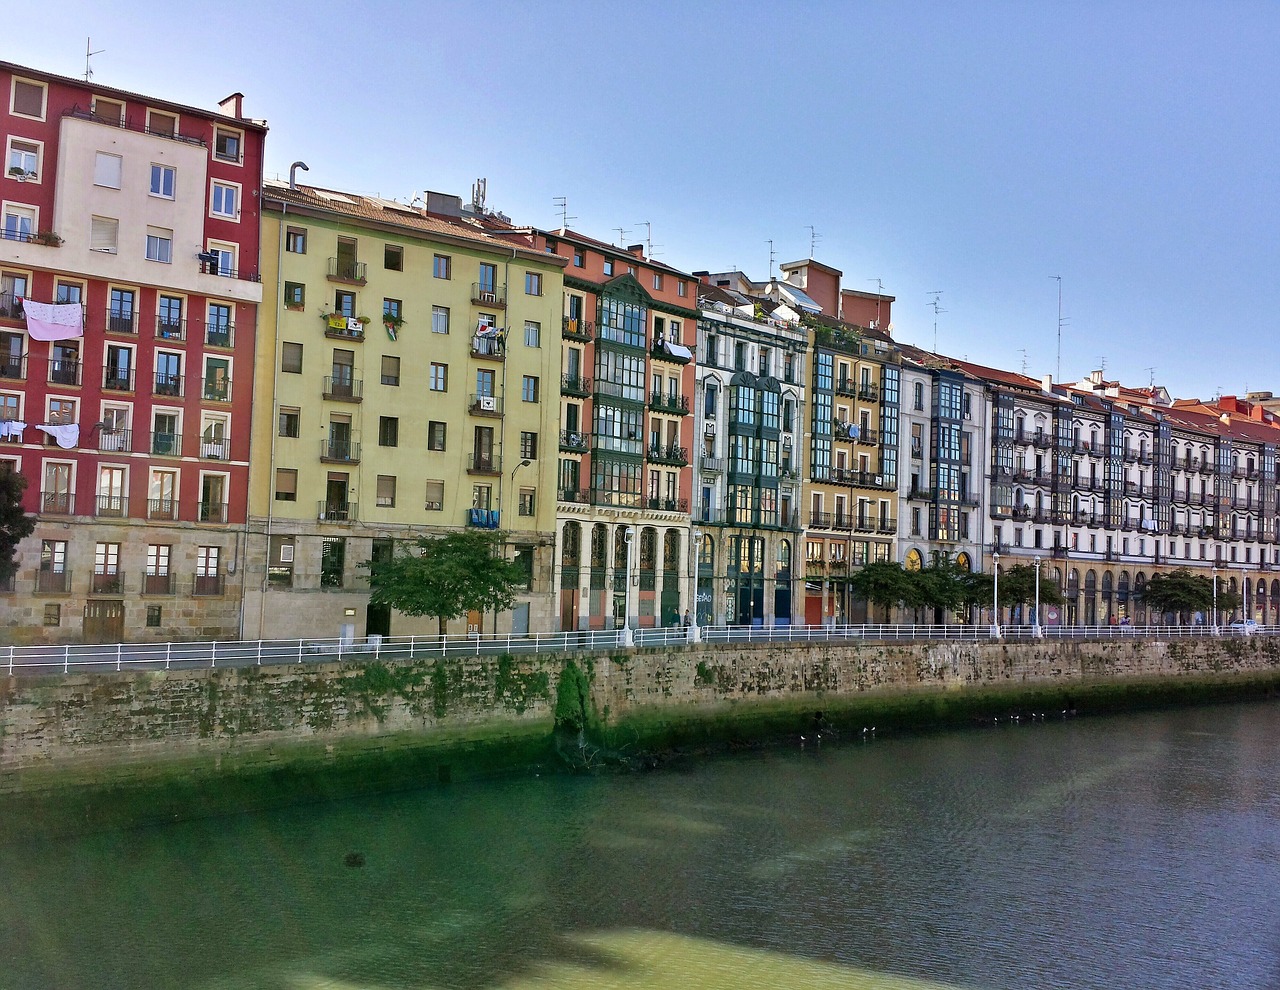 How to spend a weekend in Bilbao